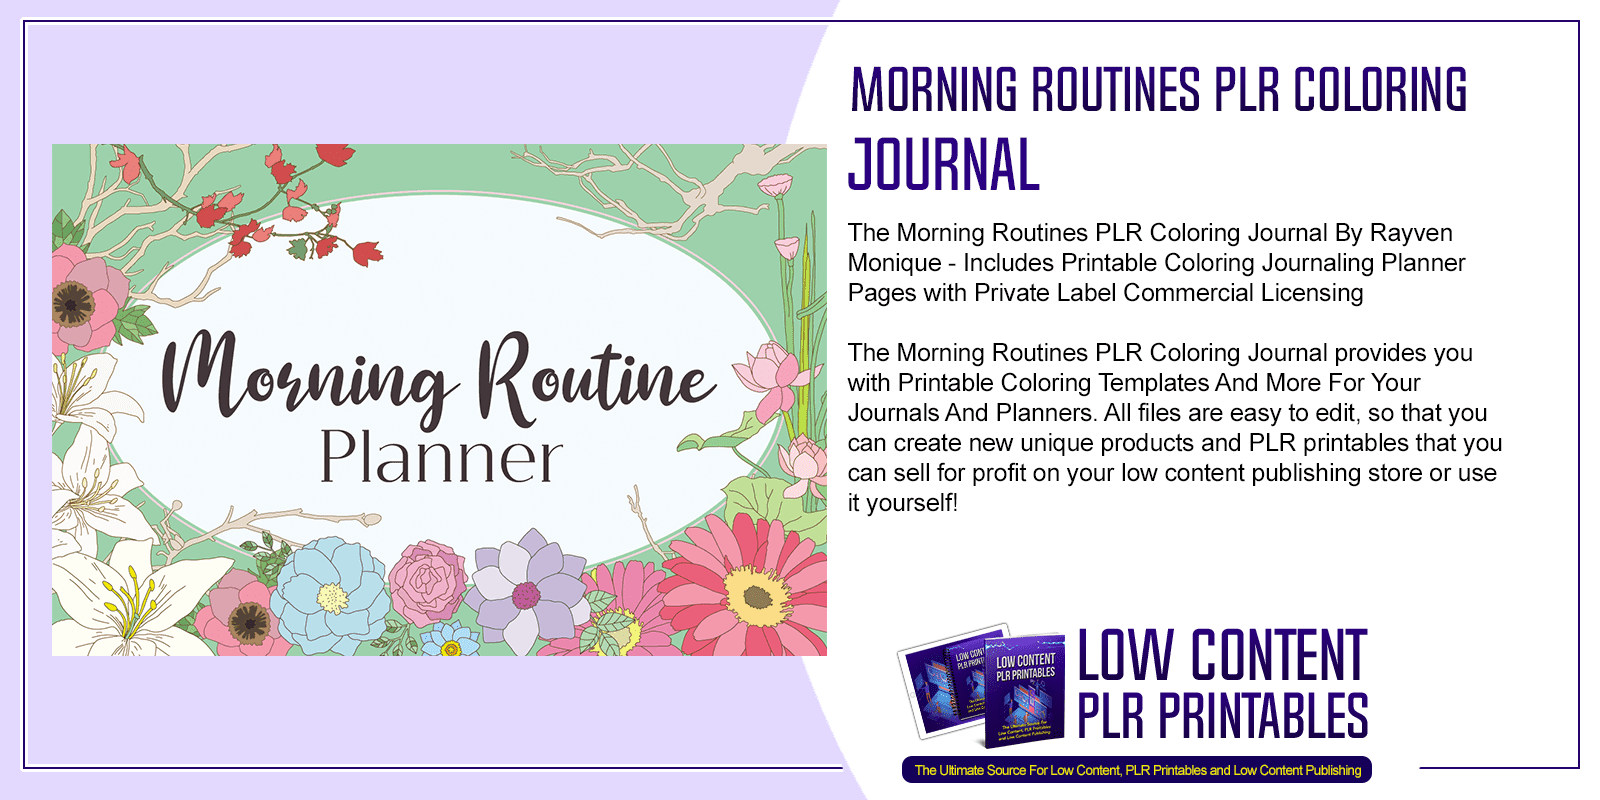 Morning Routines PLR Coloring Journal